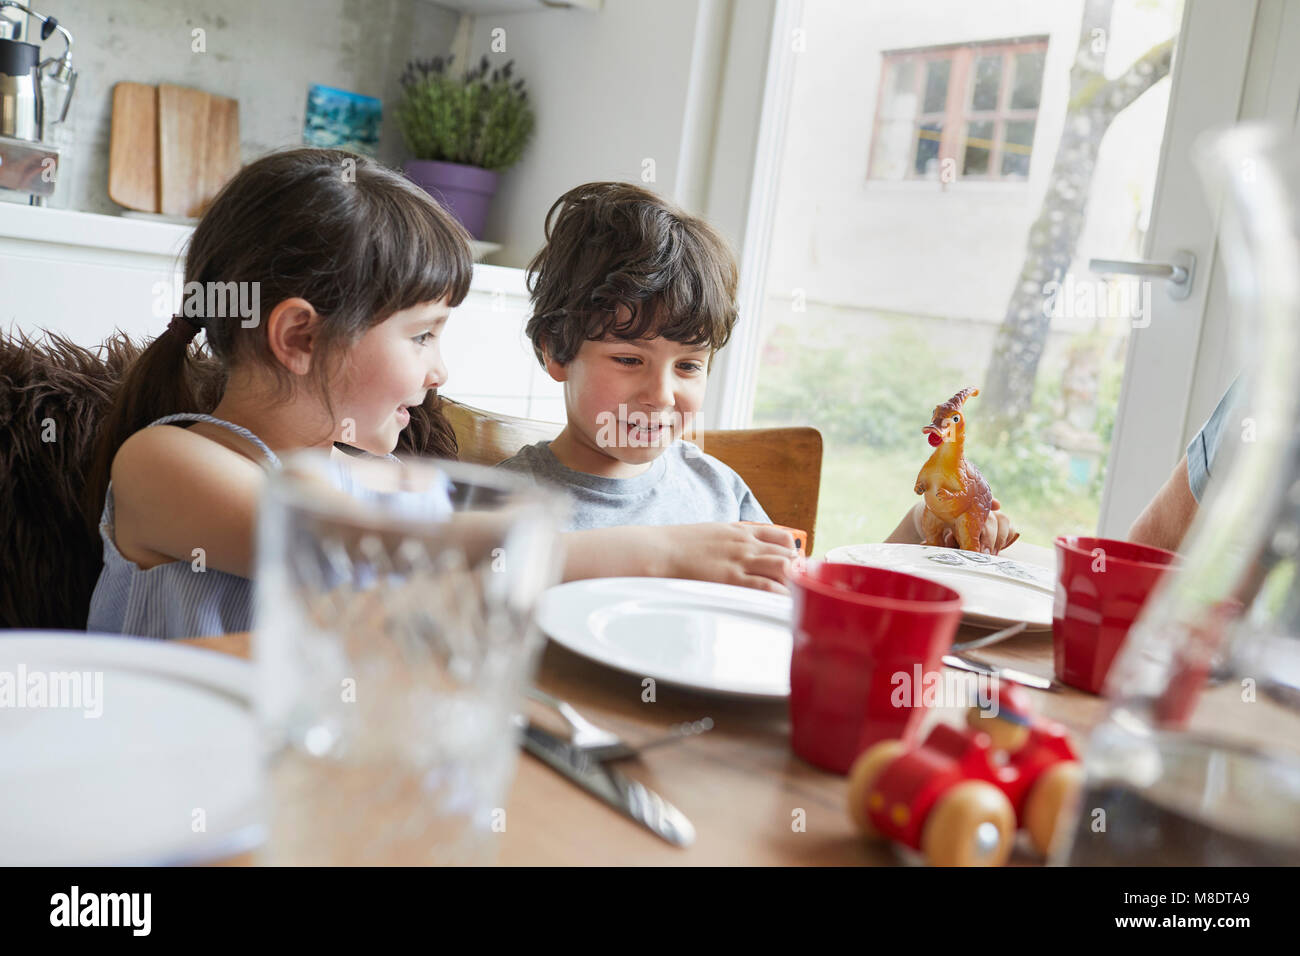 Young boy and girl sitting at dinner table, smiling Stock Photo